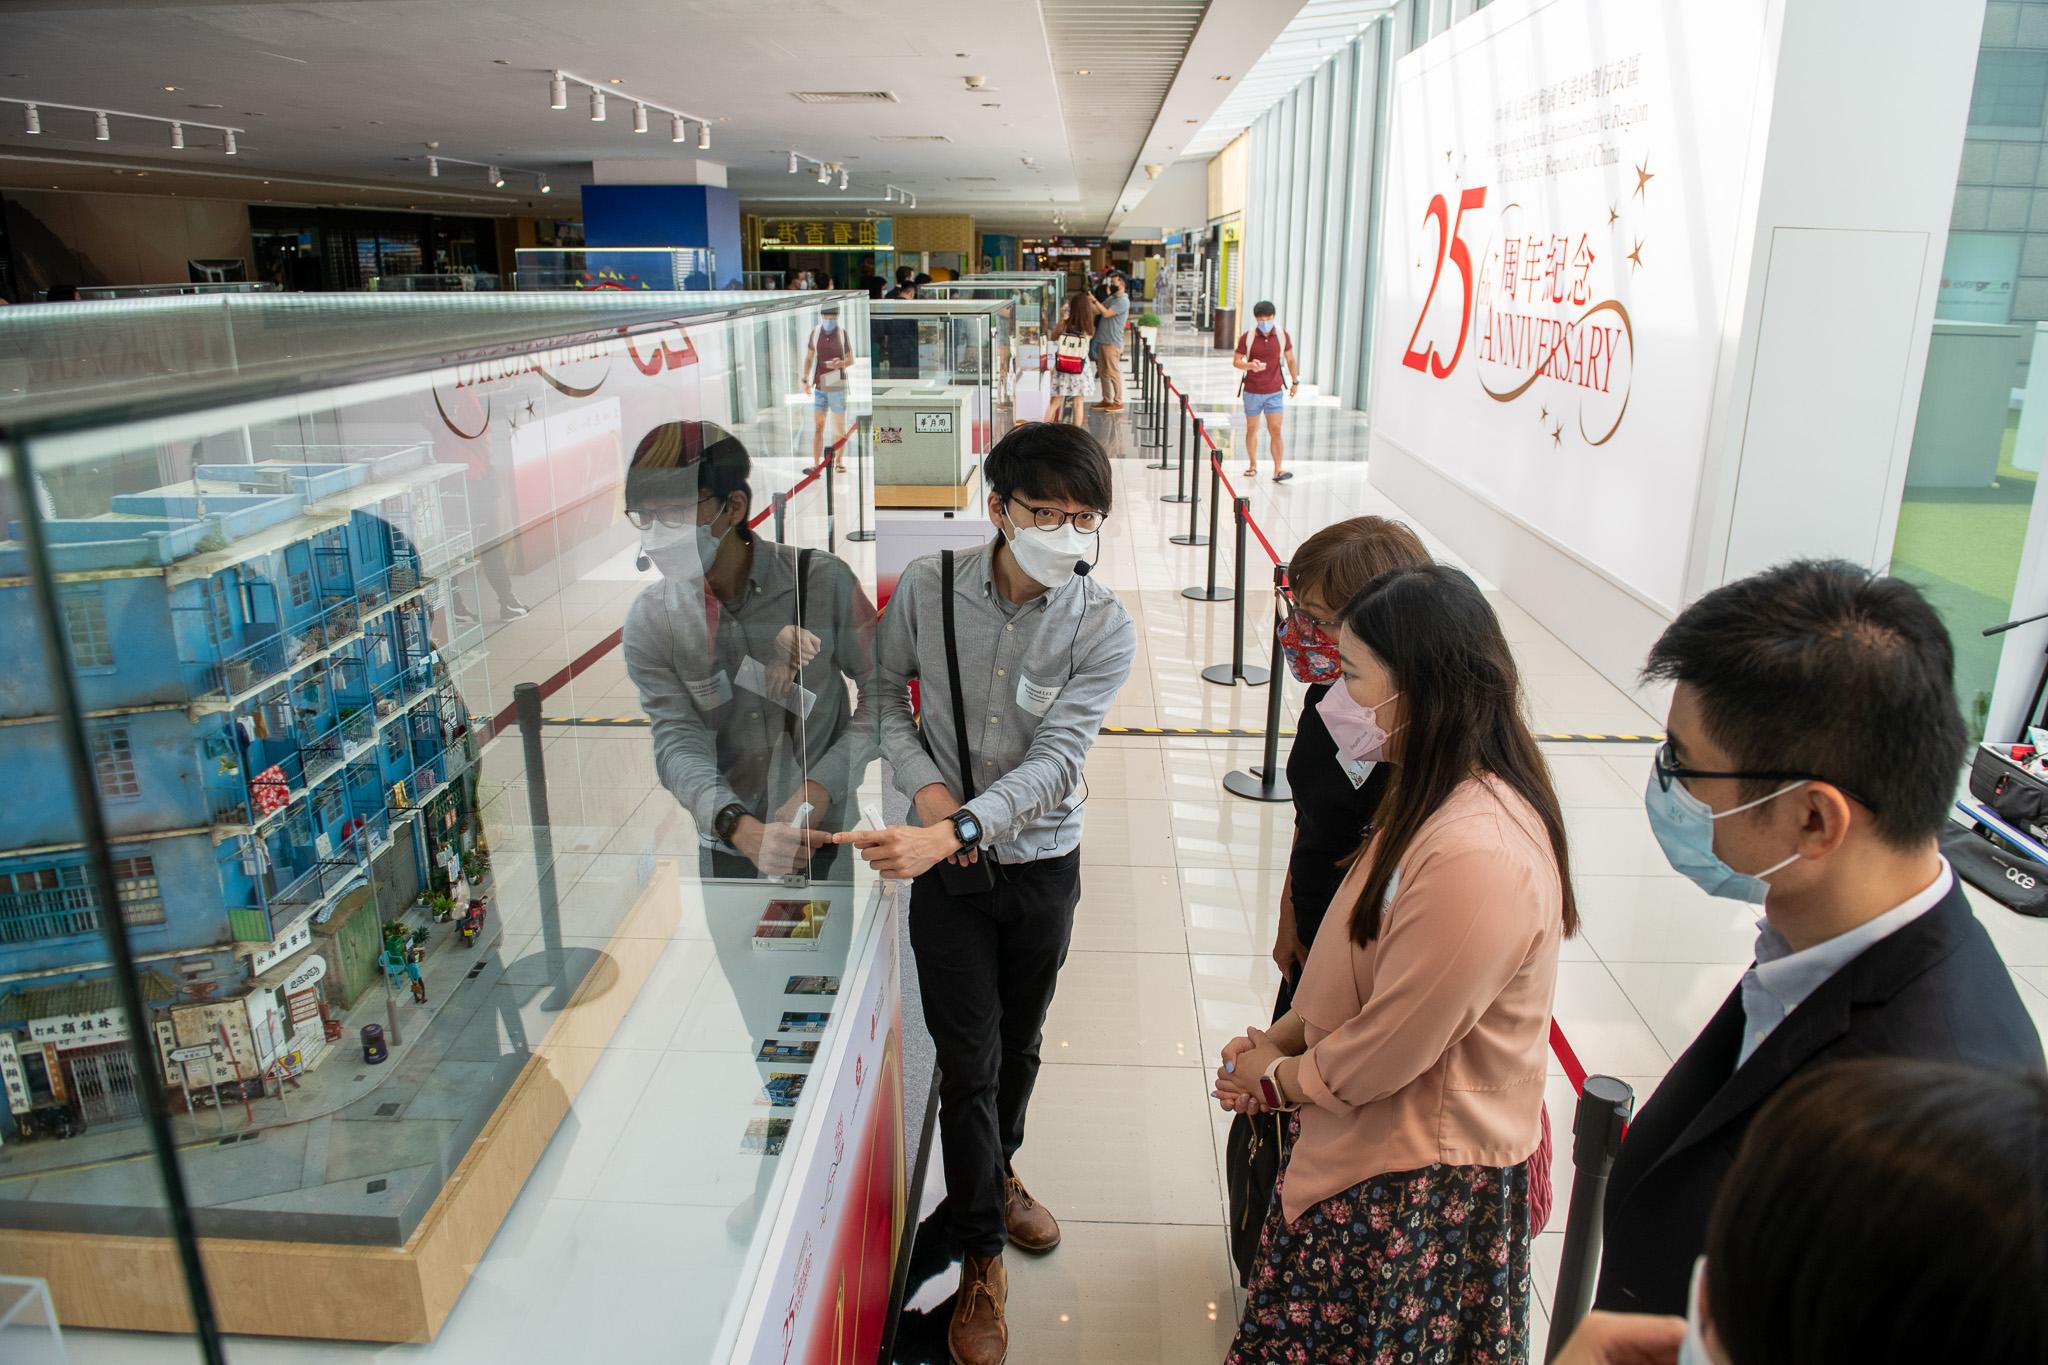 The "Hong Kong: Through the Looking Glass" miniature exhibition organised by the Hong Kong Economic and Trade Office in Singapore opened in Singapore today (April 4). Photo shows guests viewing the exhibits during a guided tour after the opening ceremony of the miniature exhibition.
